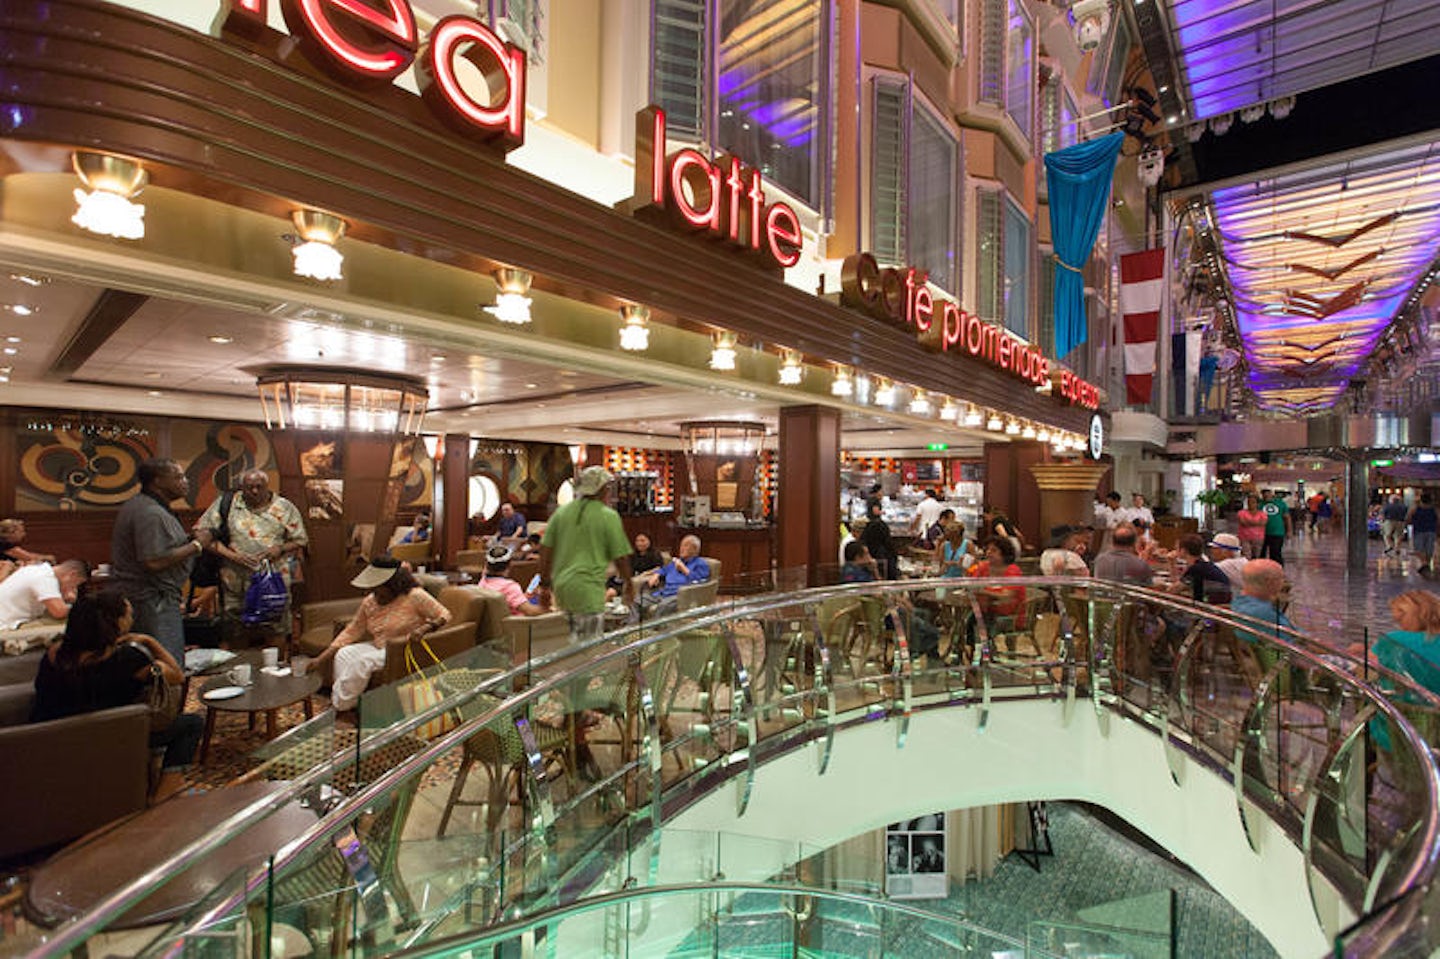 Cafe Promenade on Independence of the Seas